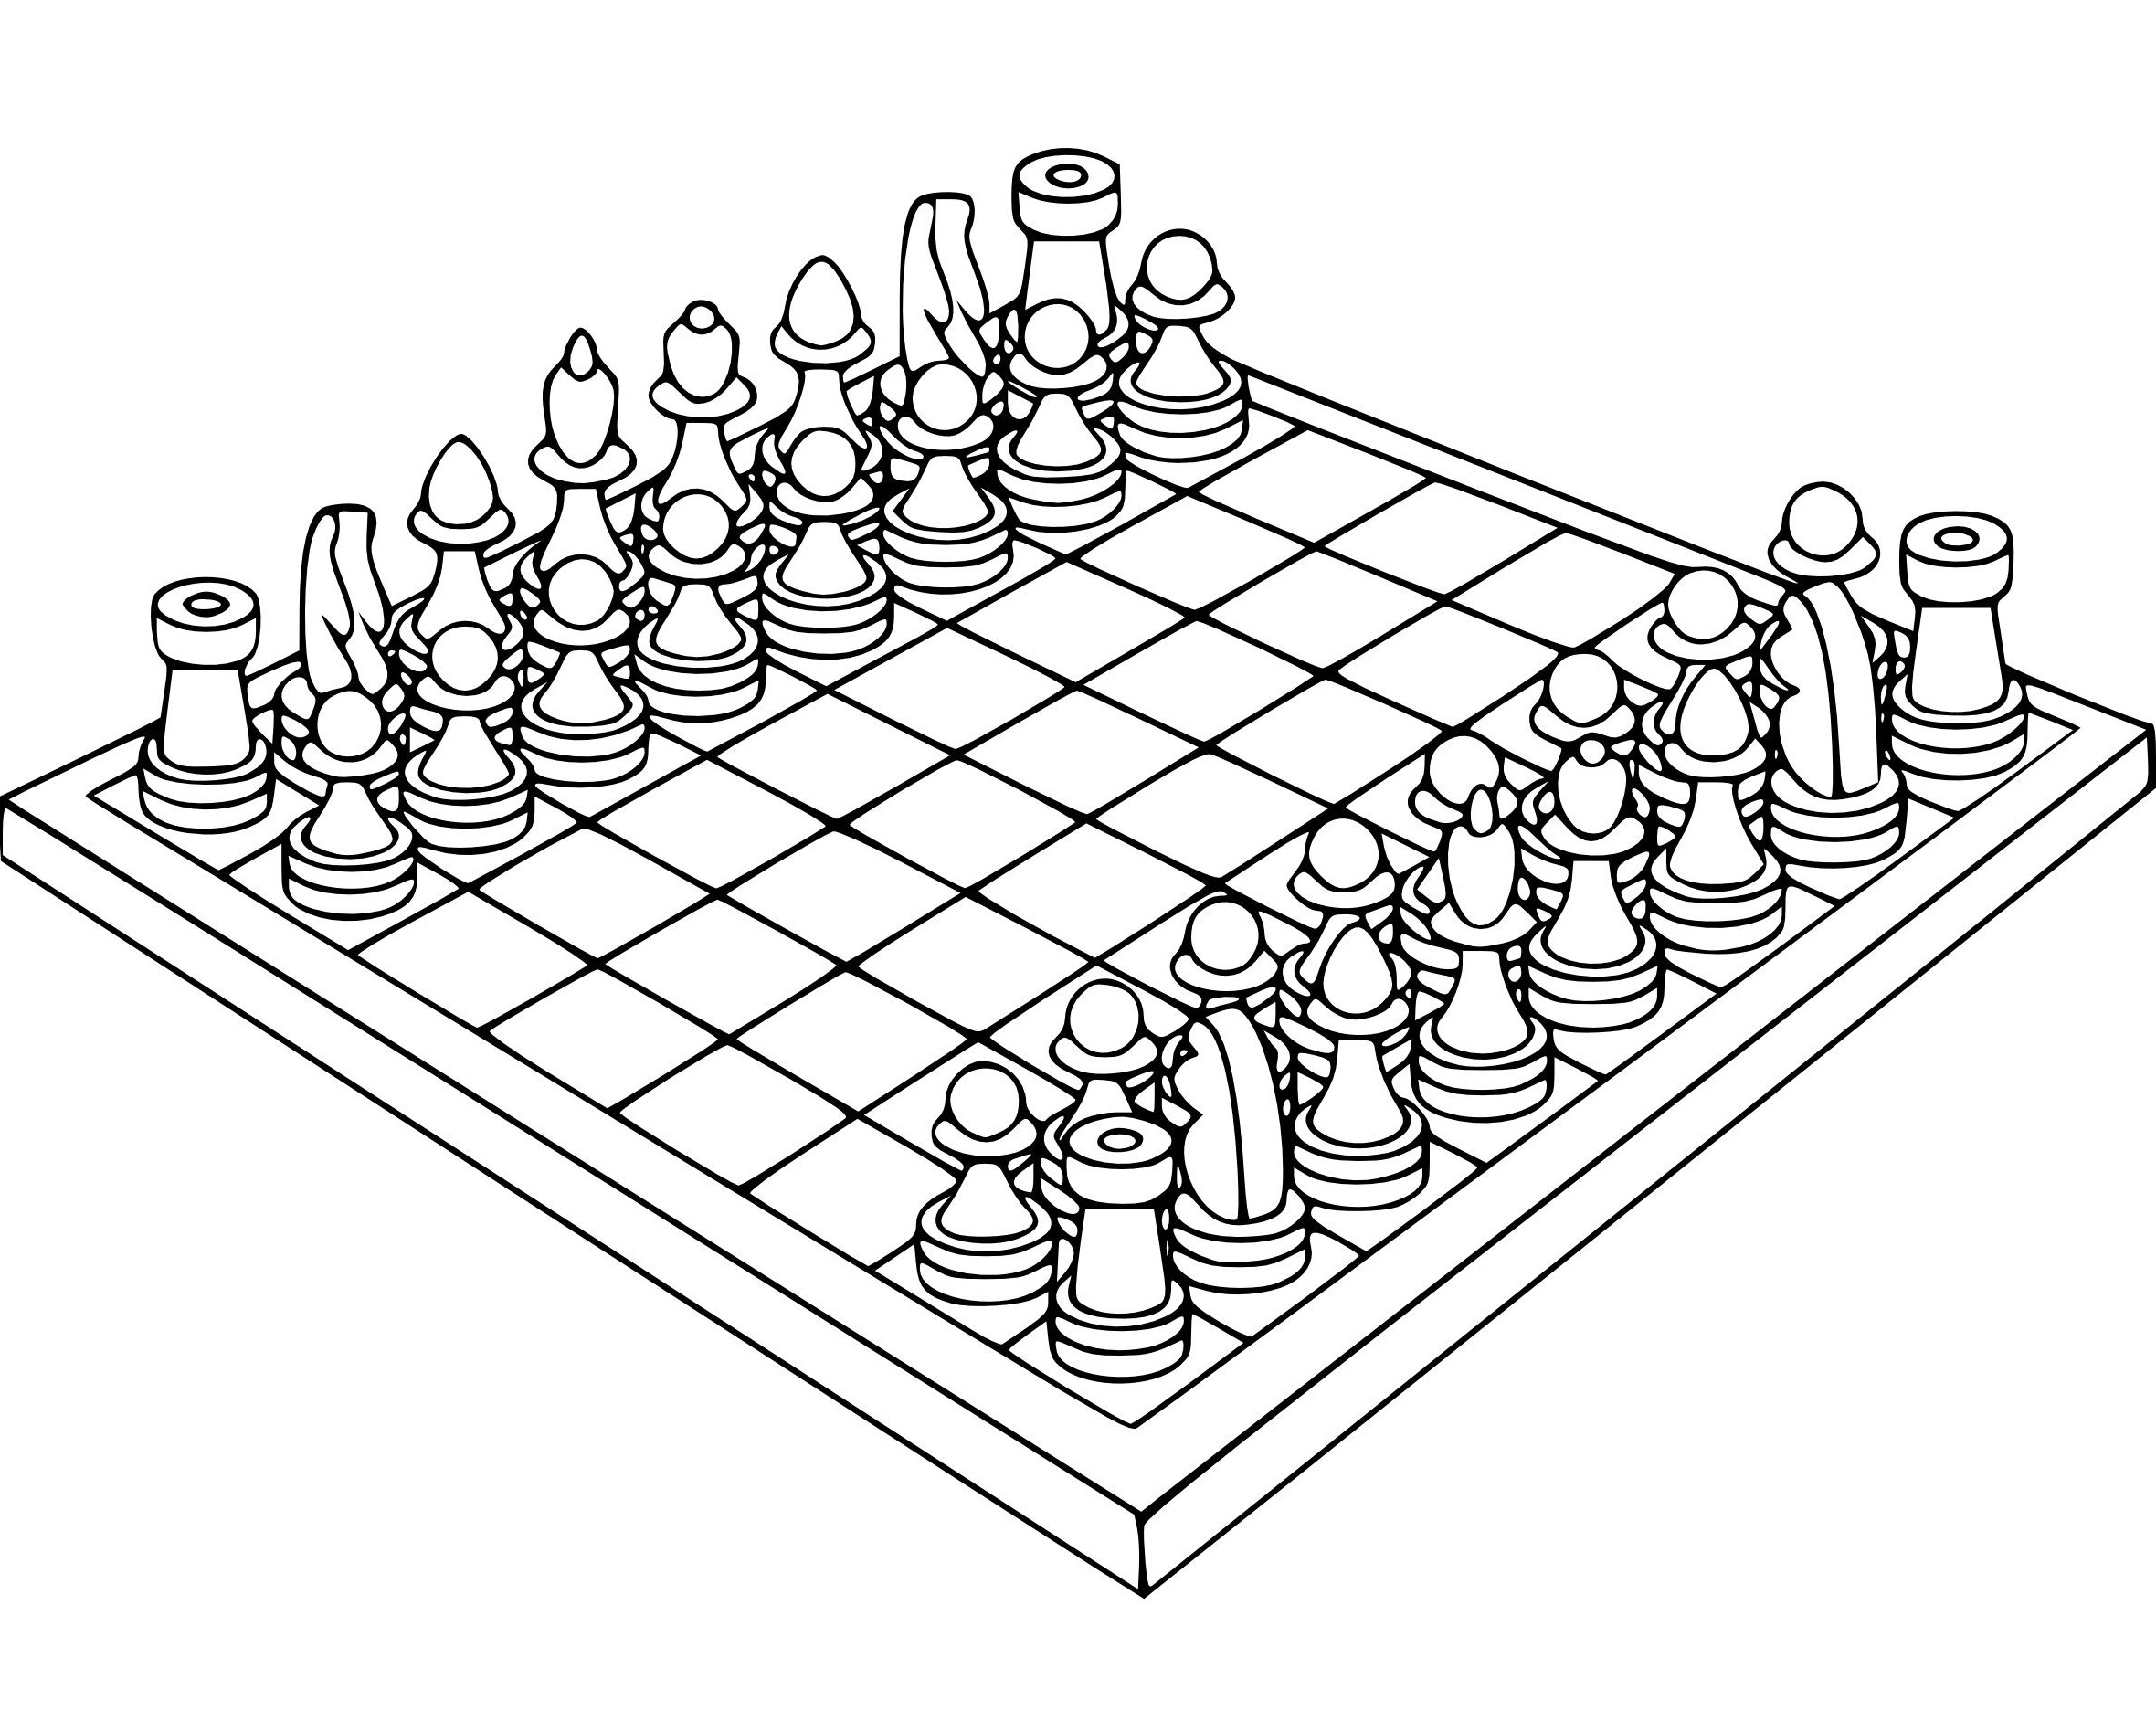 coloring pages chess board